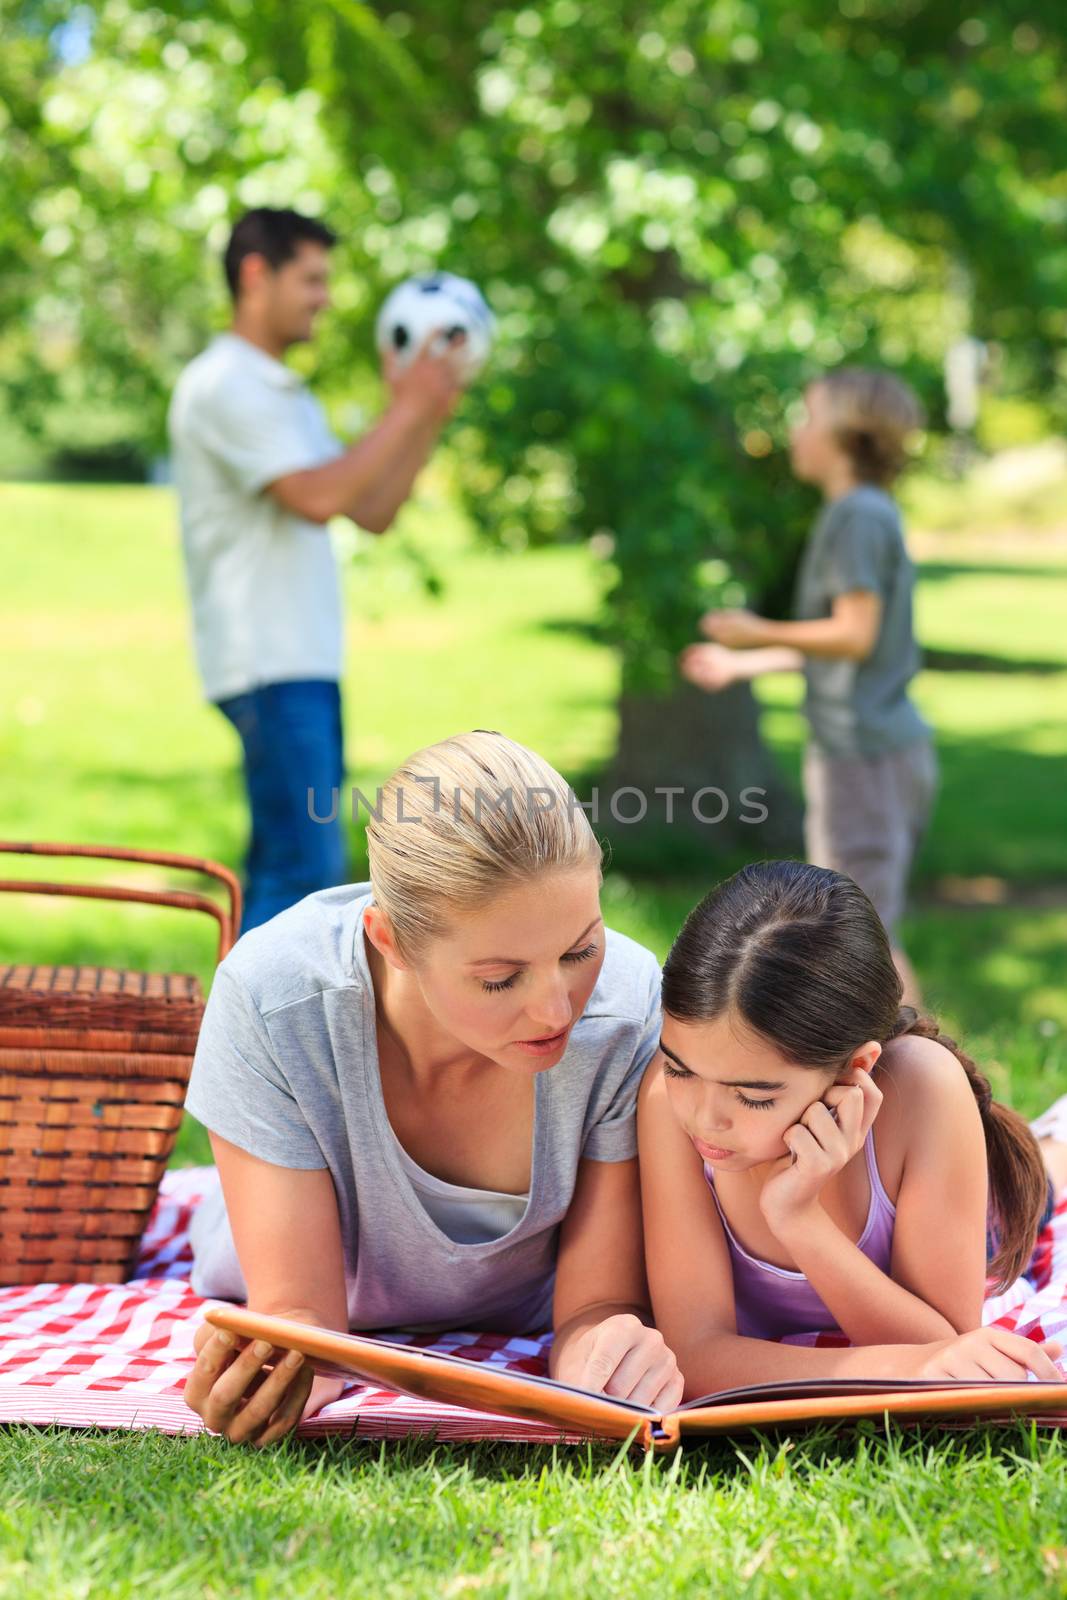 Happy family picnicking in the park by Wavebreakmedia